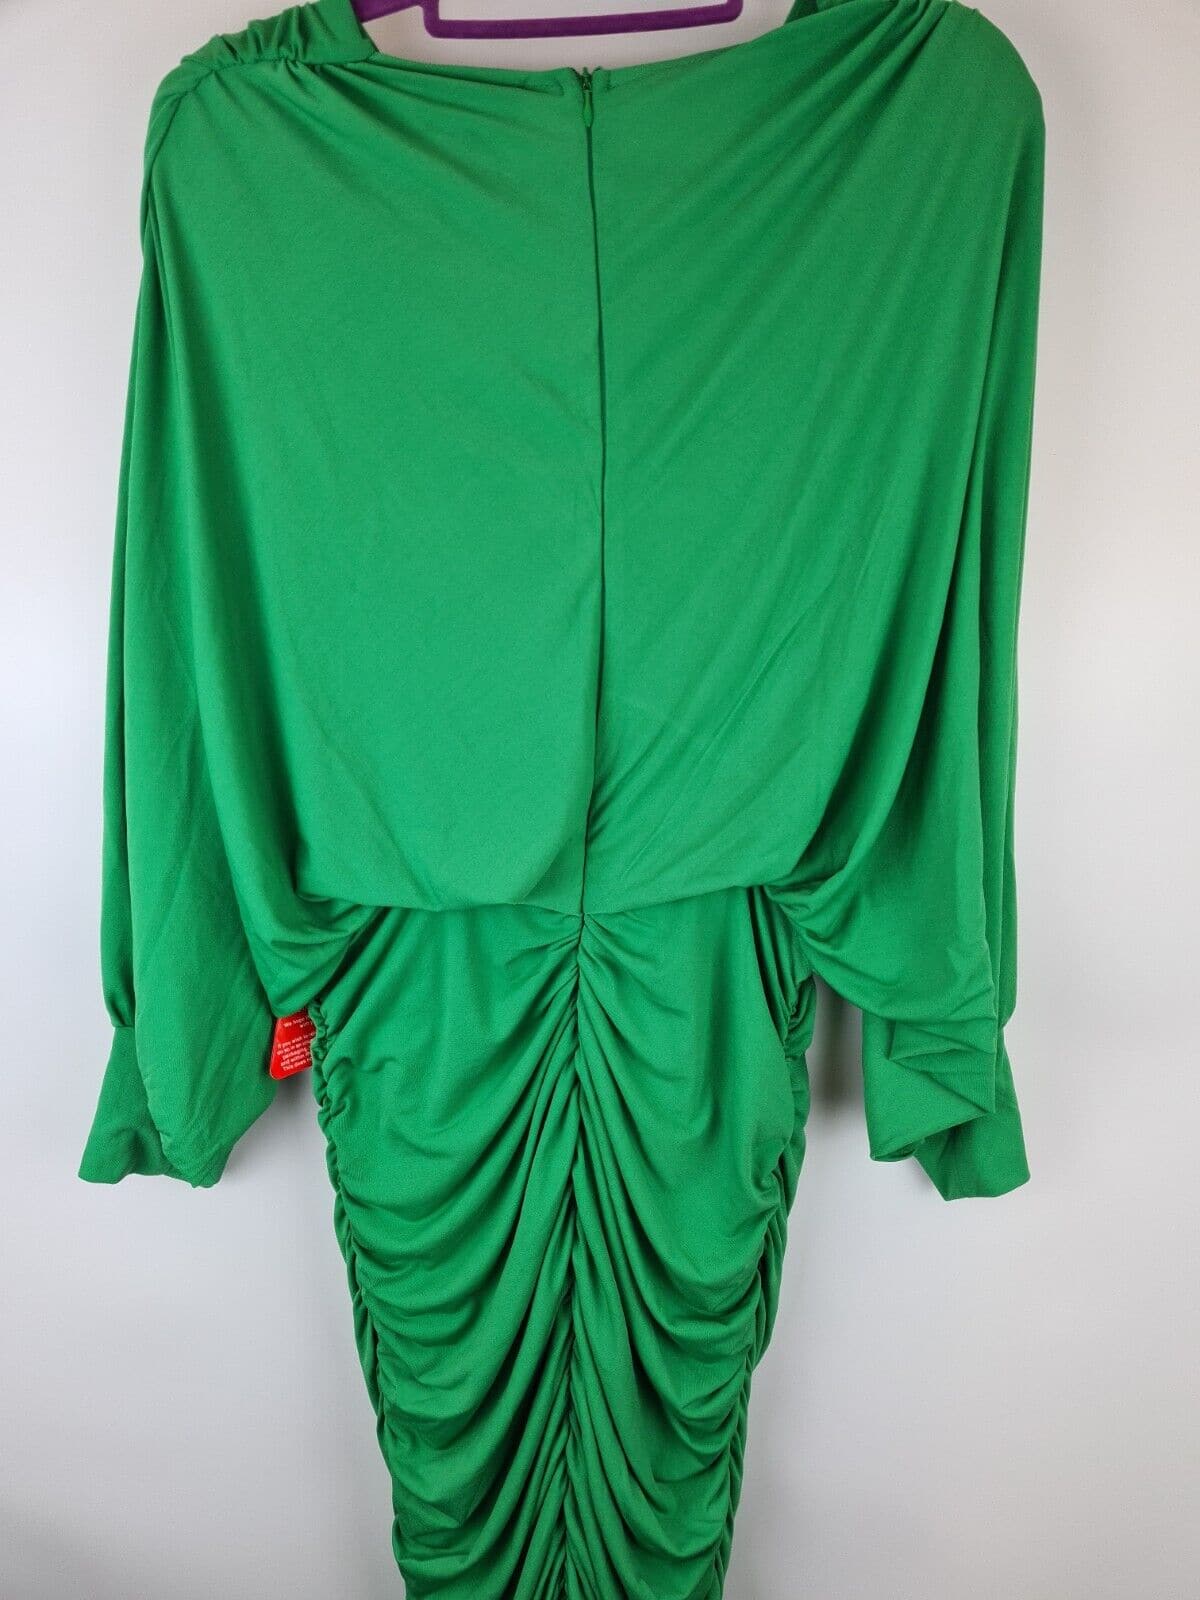 Ax Paris Green Ruched Bat Wing Plunge Dress Size UK 12 **** V266 - Big_Stock_Clearance